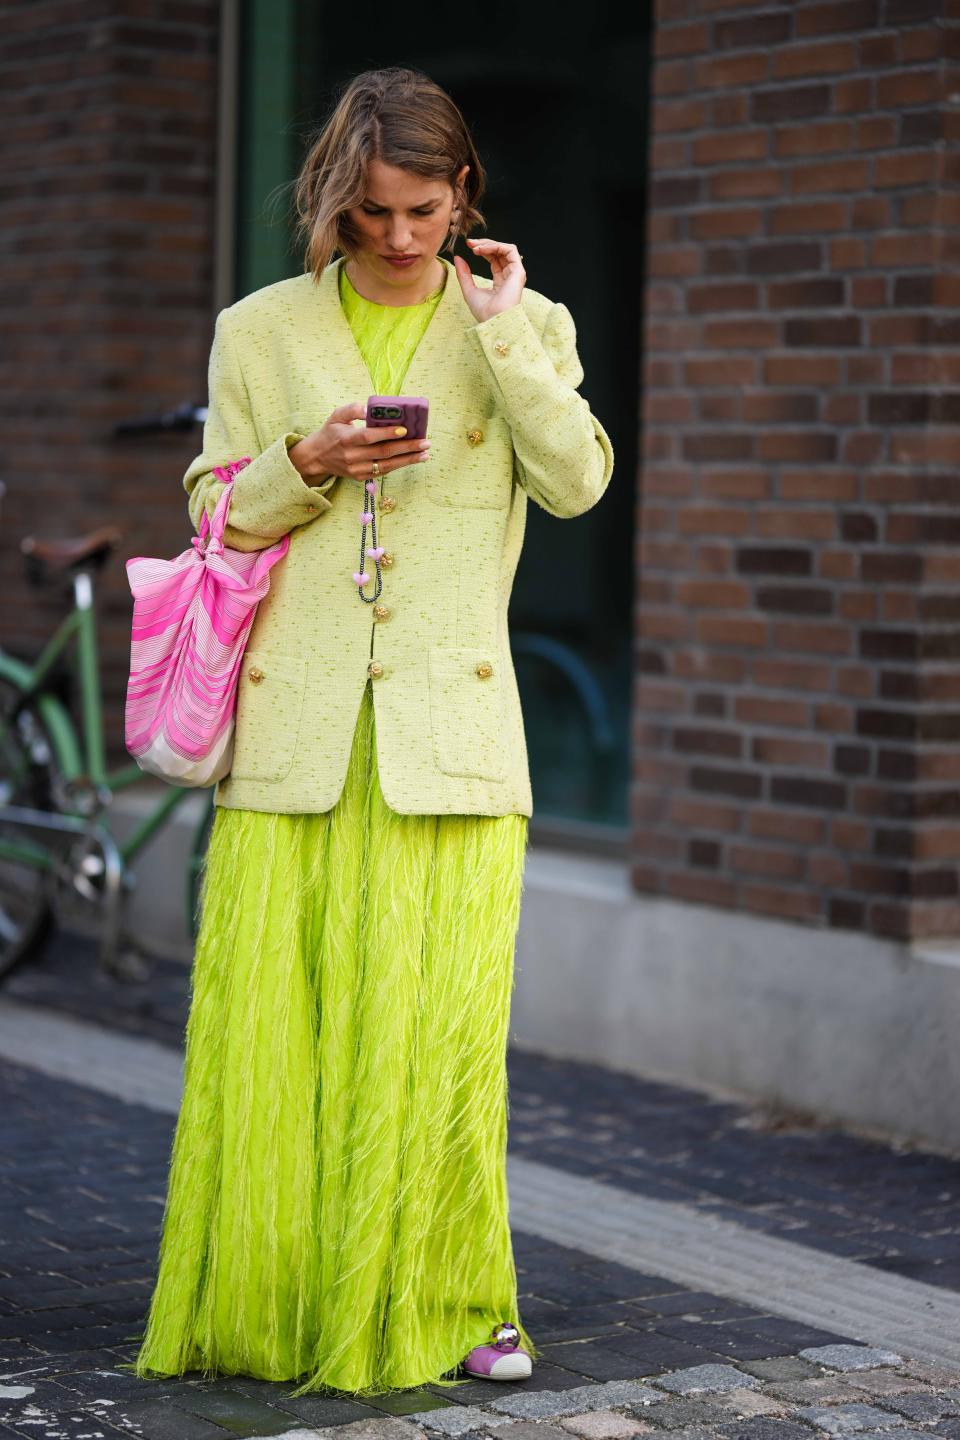 A fashion show attendee sporting a neon dress and blazer scrolls on her phone outside the venue